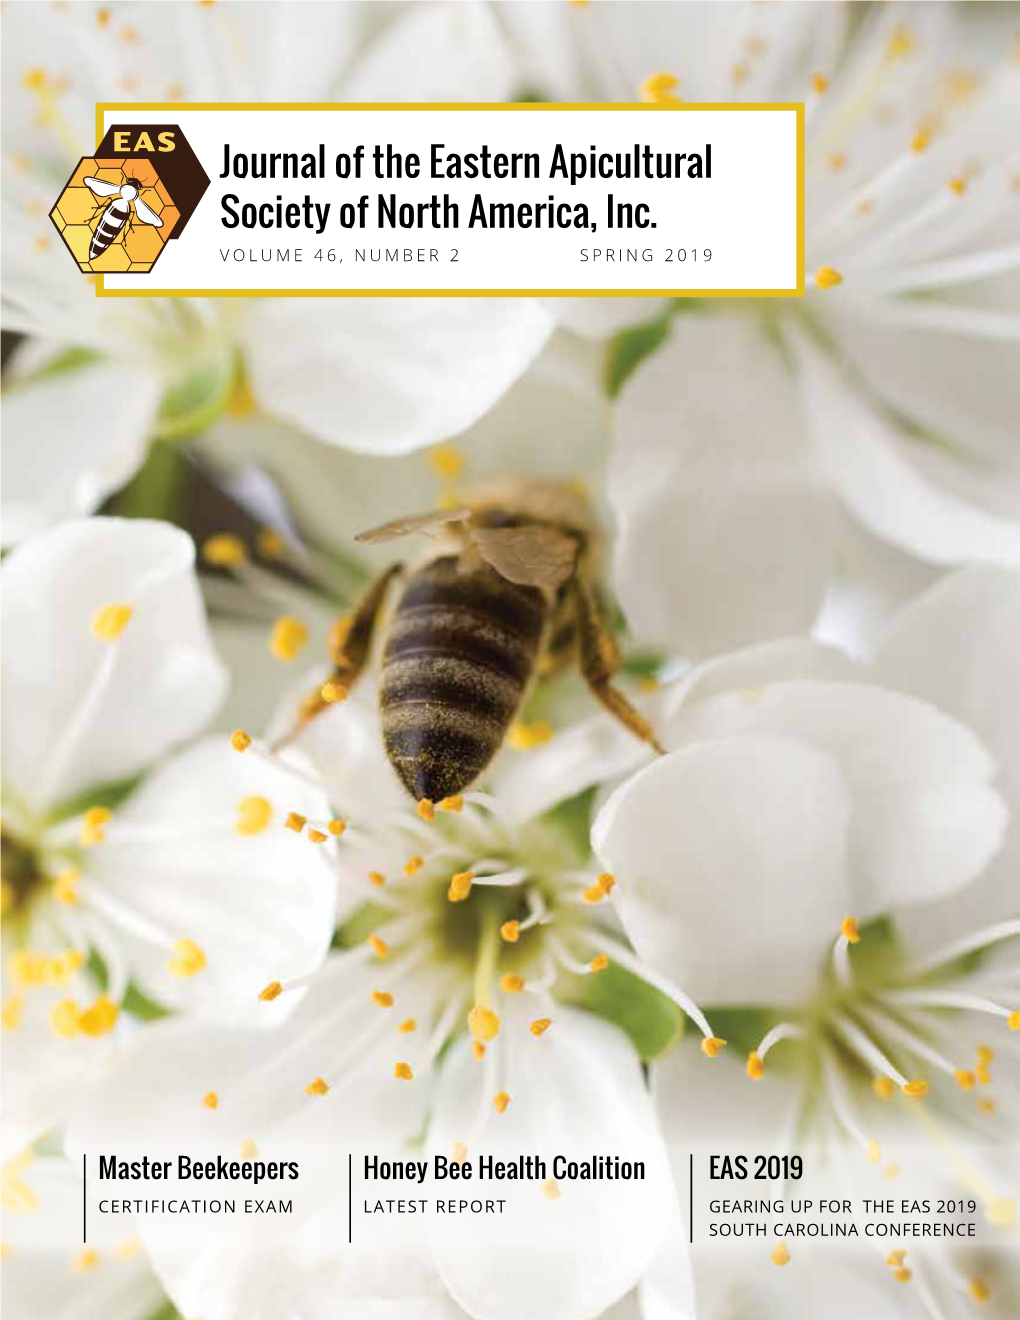 Journal of the Eastern Apicultural Society of North America, Inc. VOLUME 46, NUMBER 2 SPRING 2019